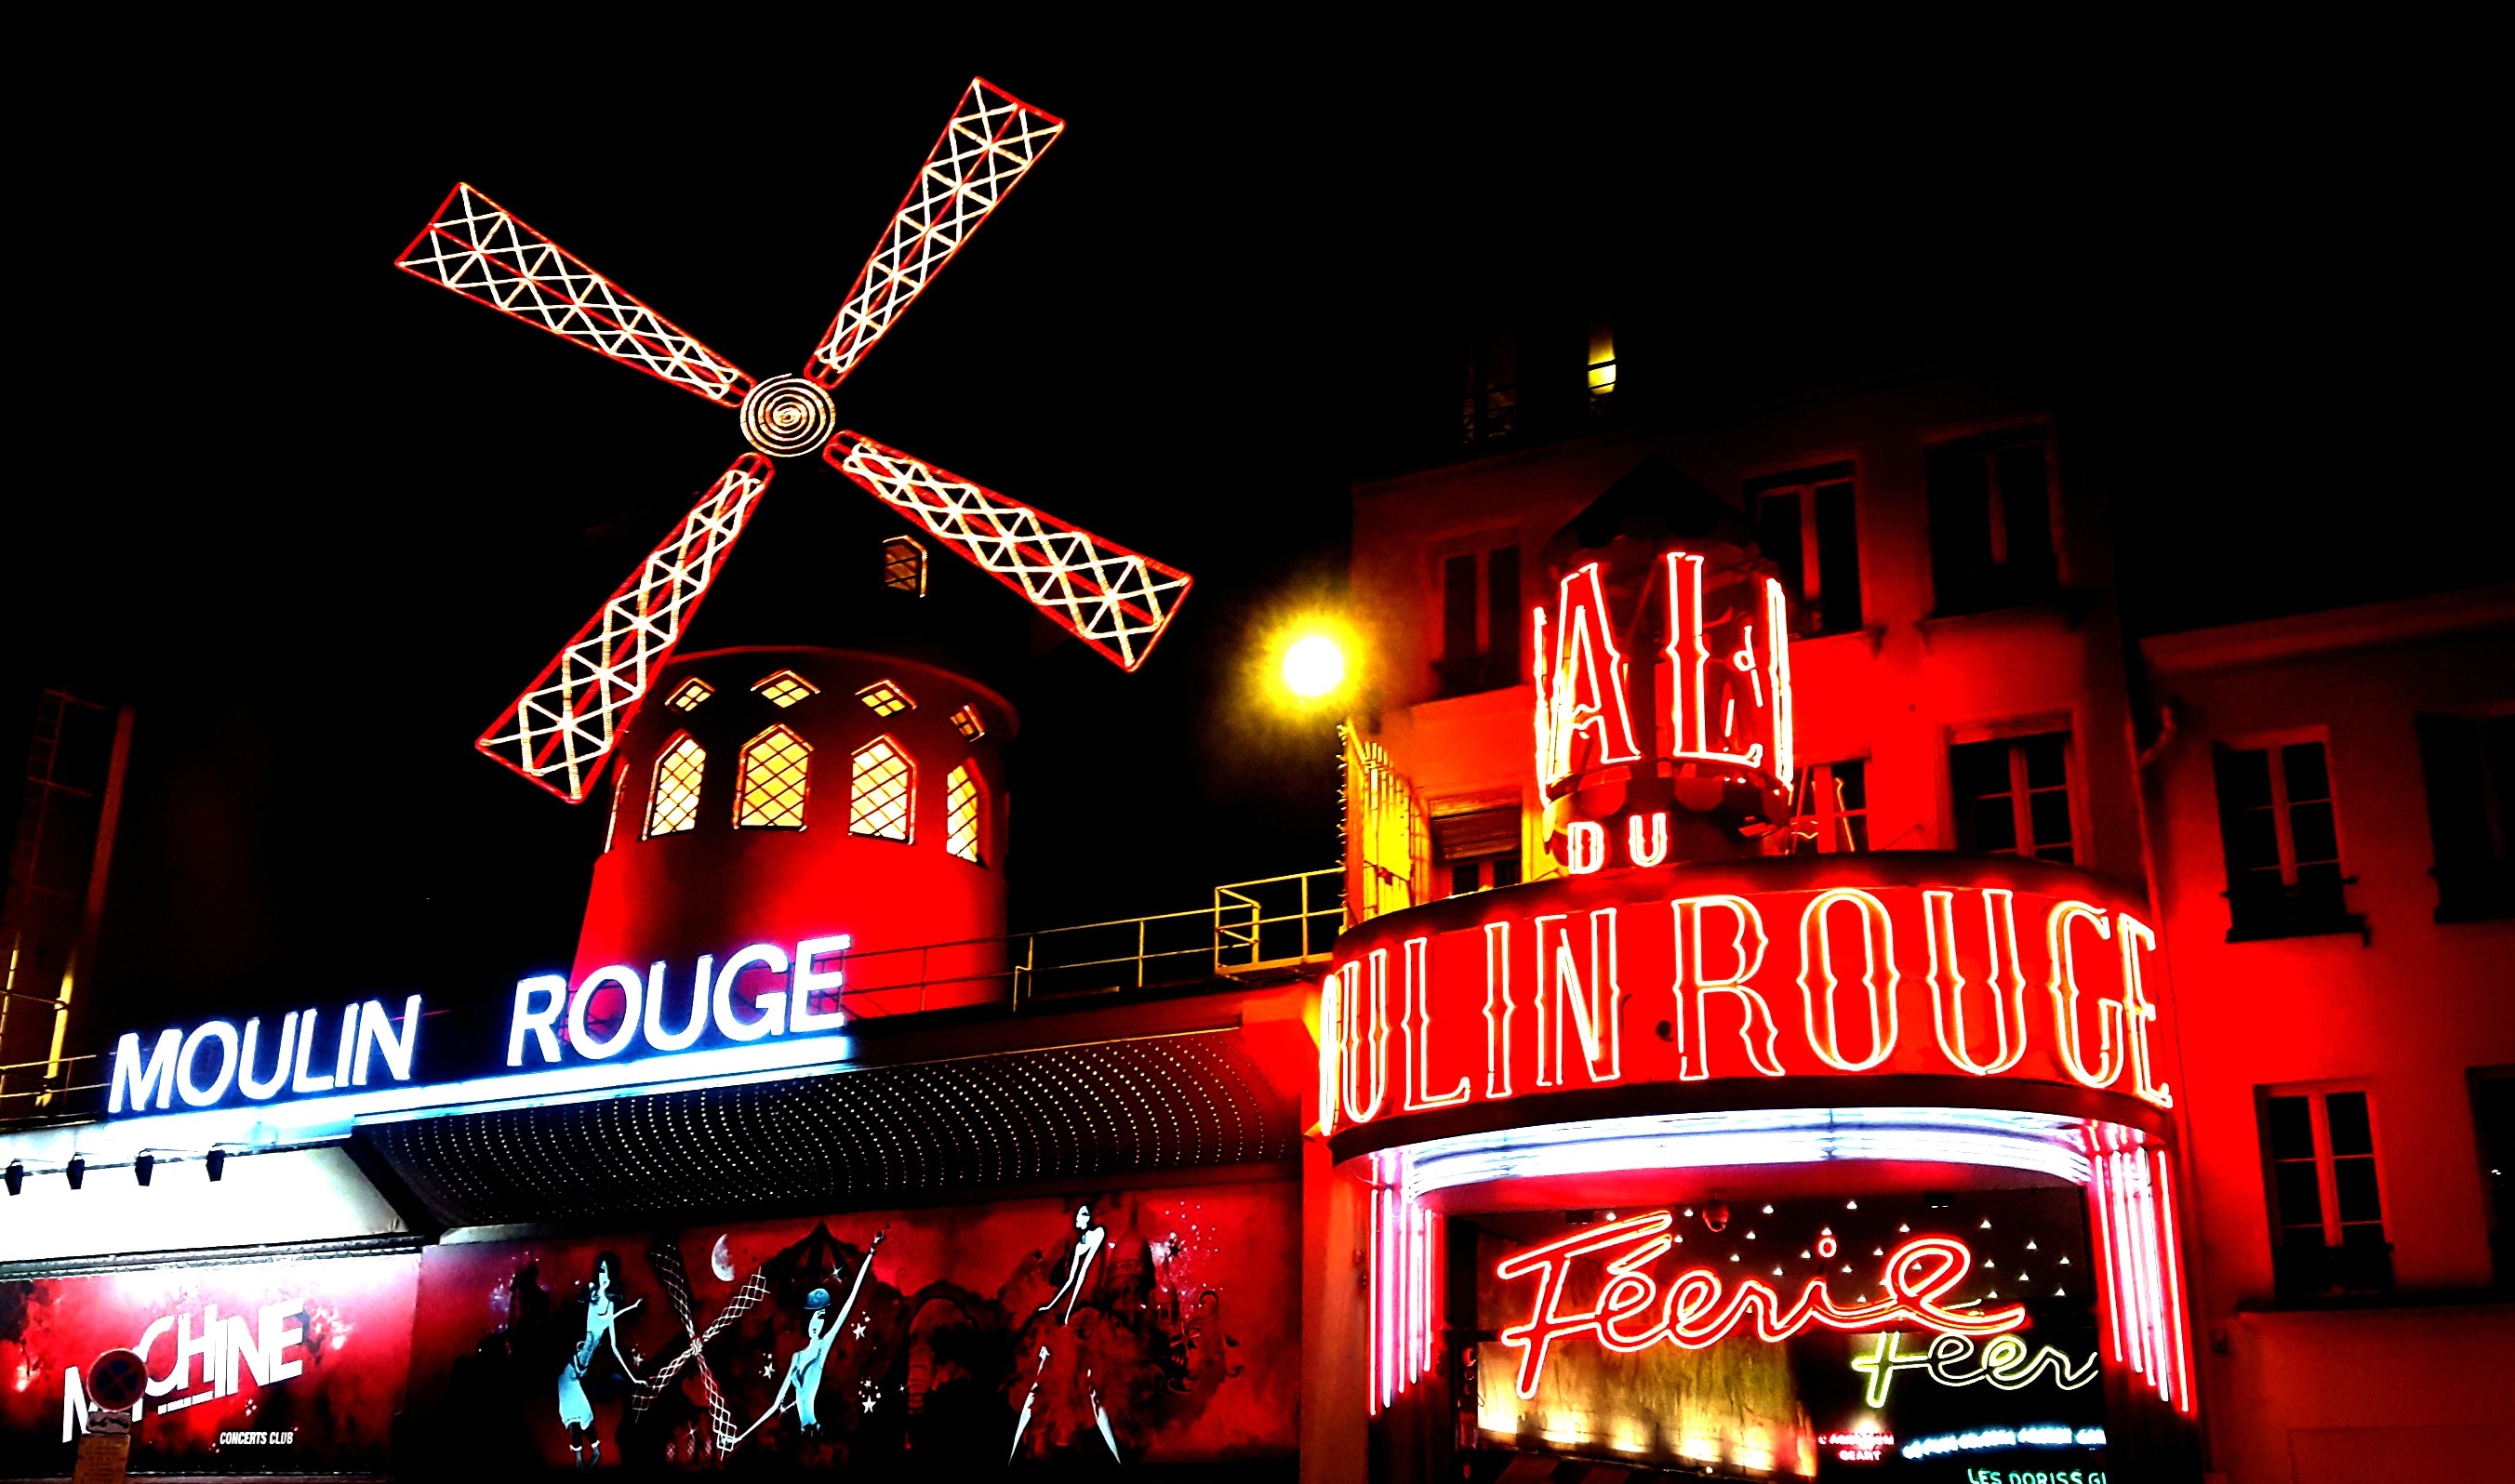 Moulin Rouge! #18